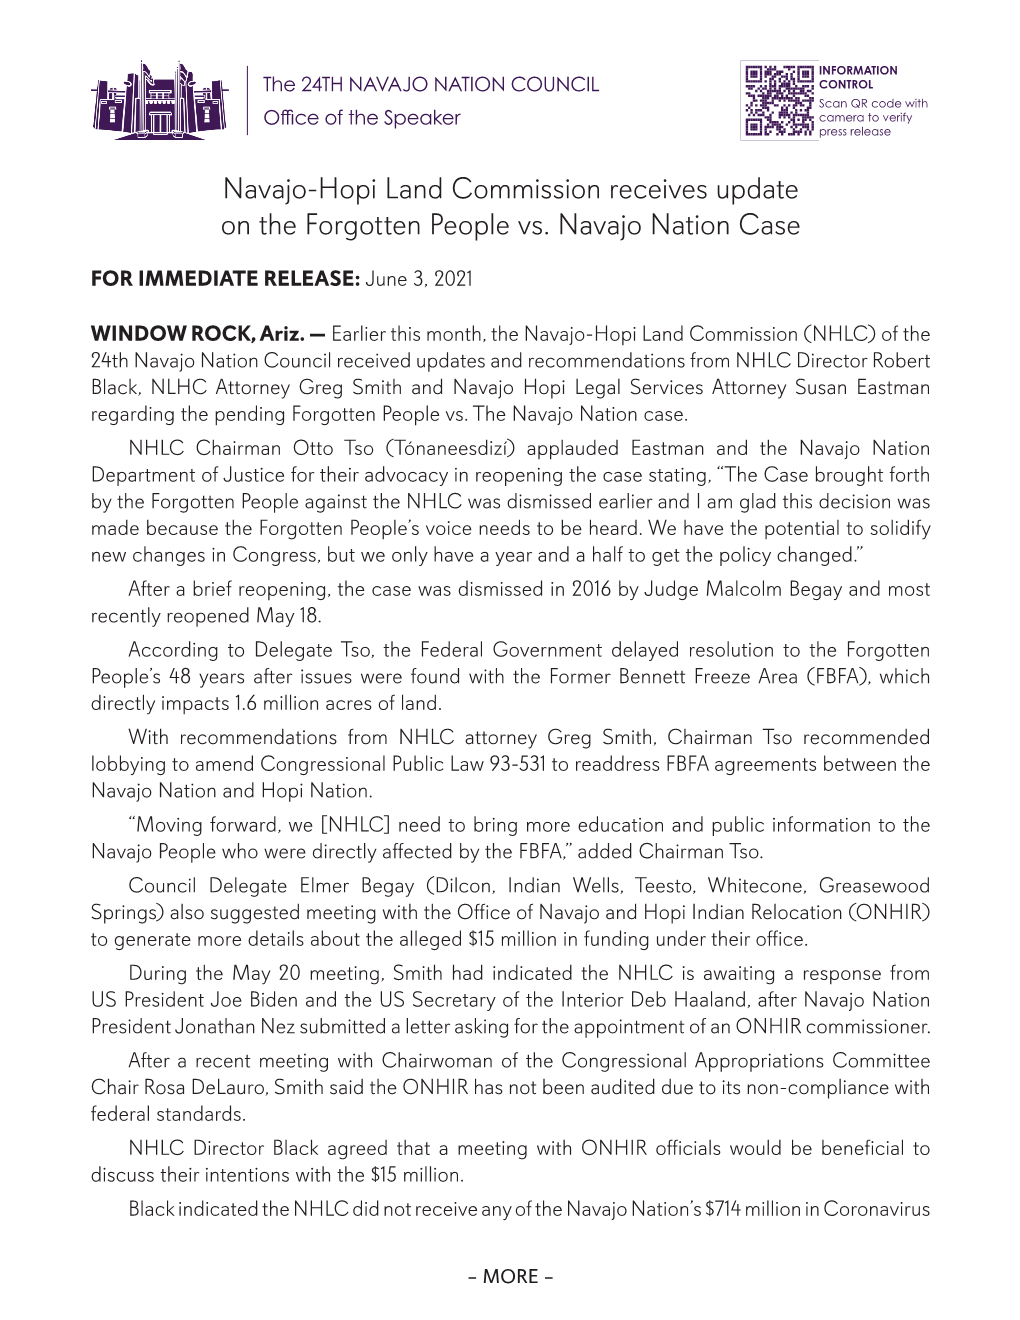 Navajo-Hopi Land Commission Receives Update on the Forgotten People Vs